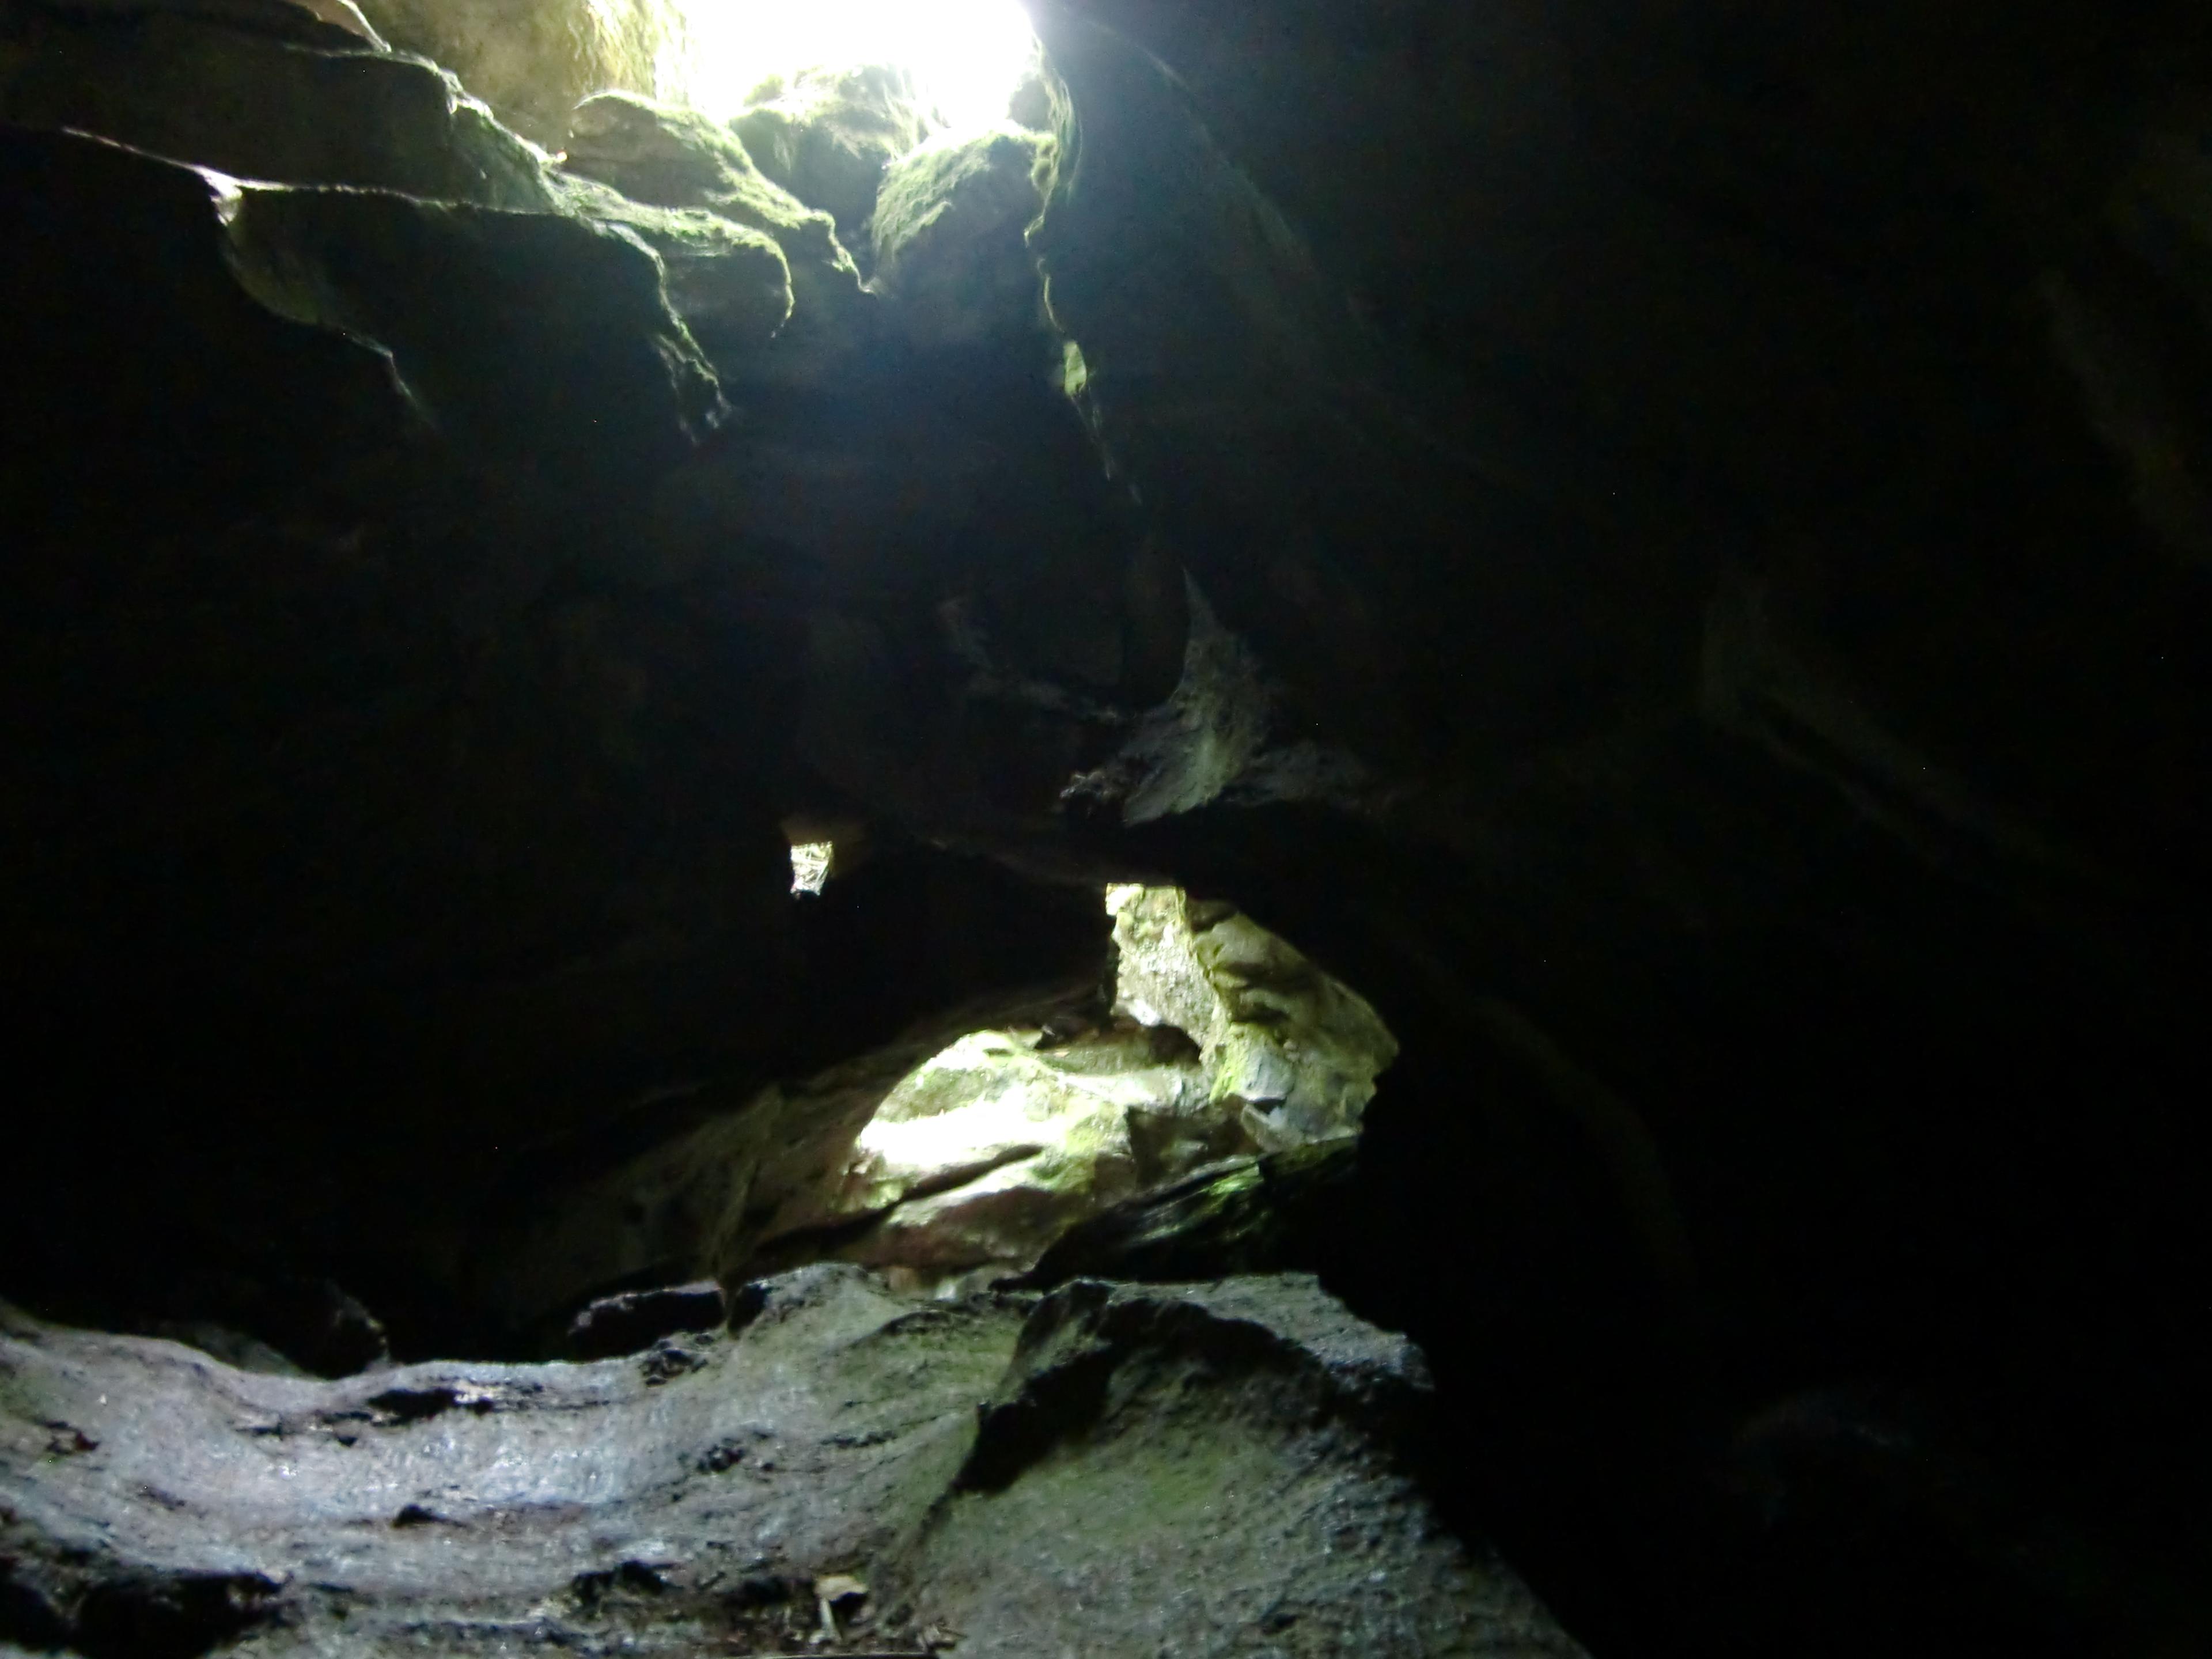 Cover image of this place Lusk Caves